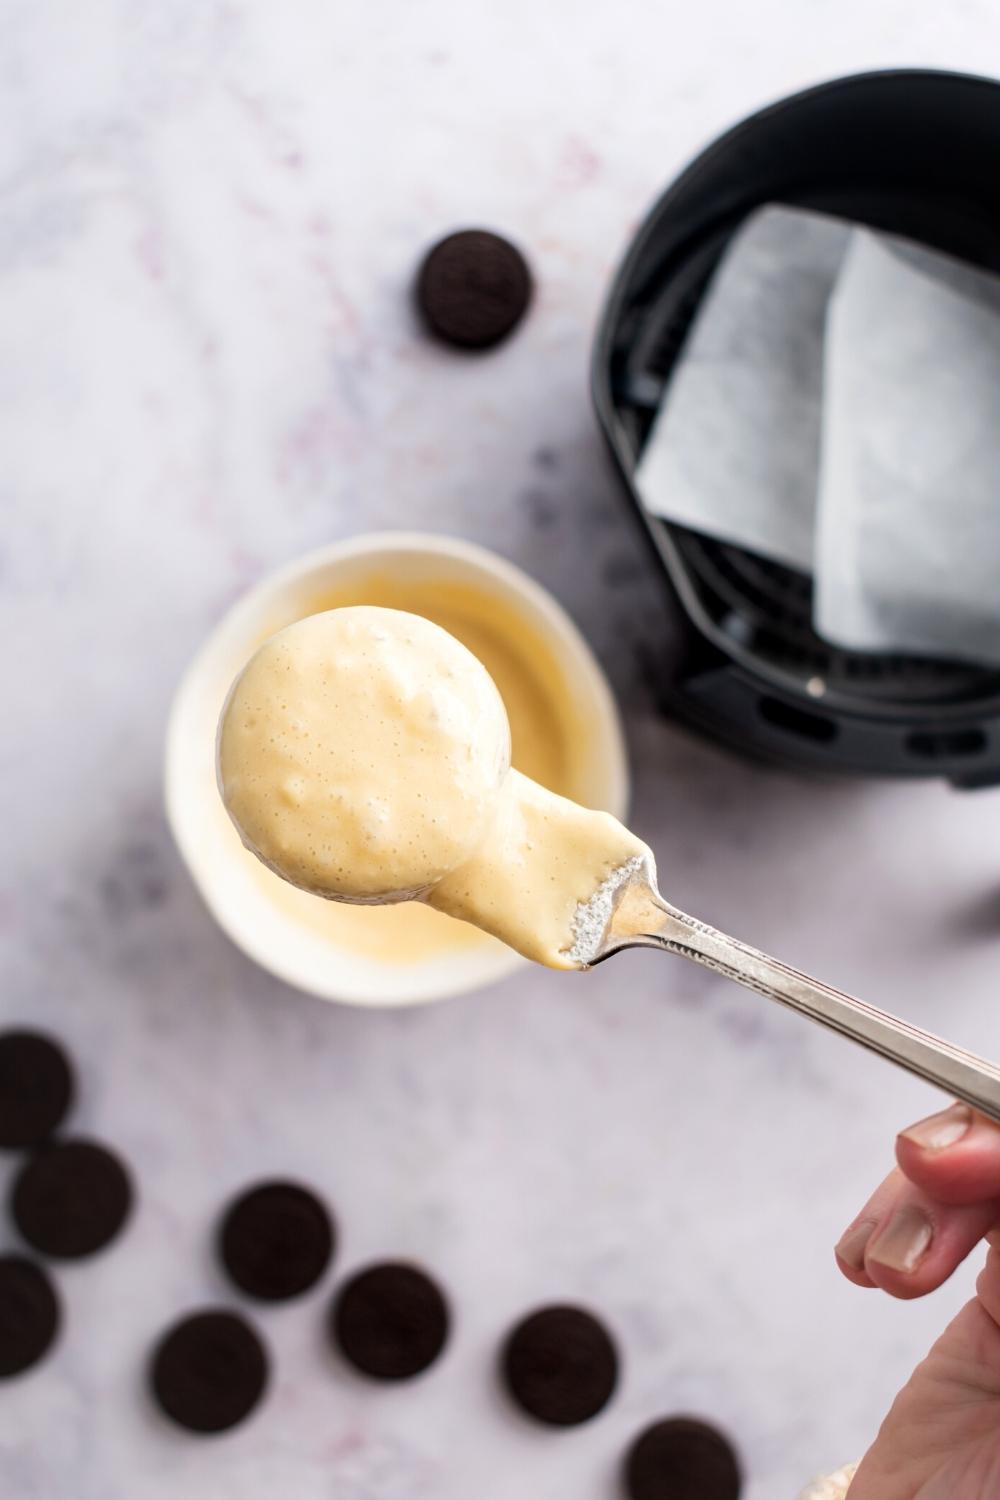 An Oreo coded and pancake batter on a spoon that is being held by a hand above the ball of the batter, Oreos, and part of an air fryer all on a white counter.